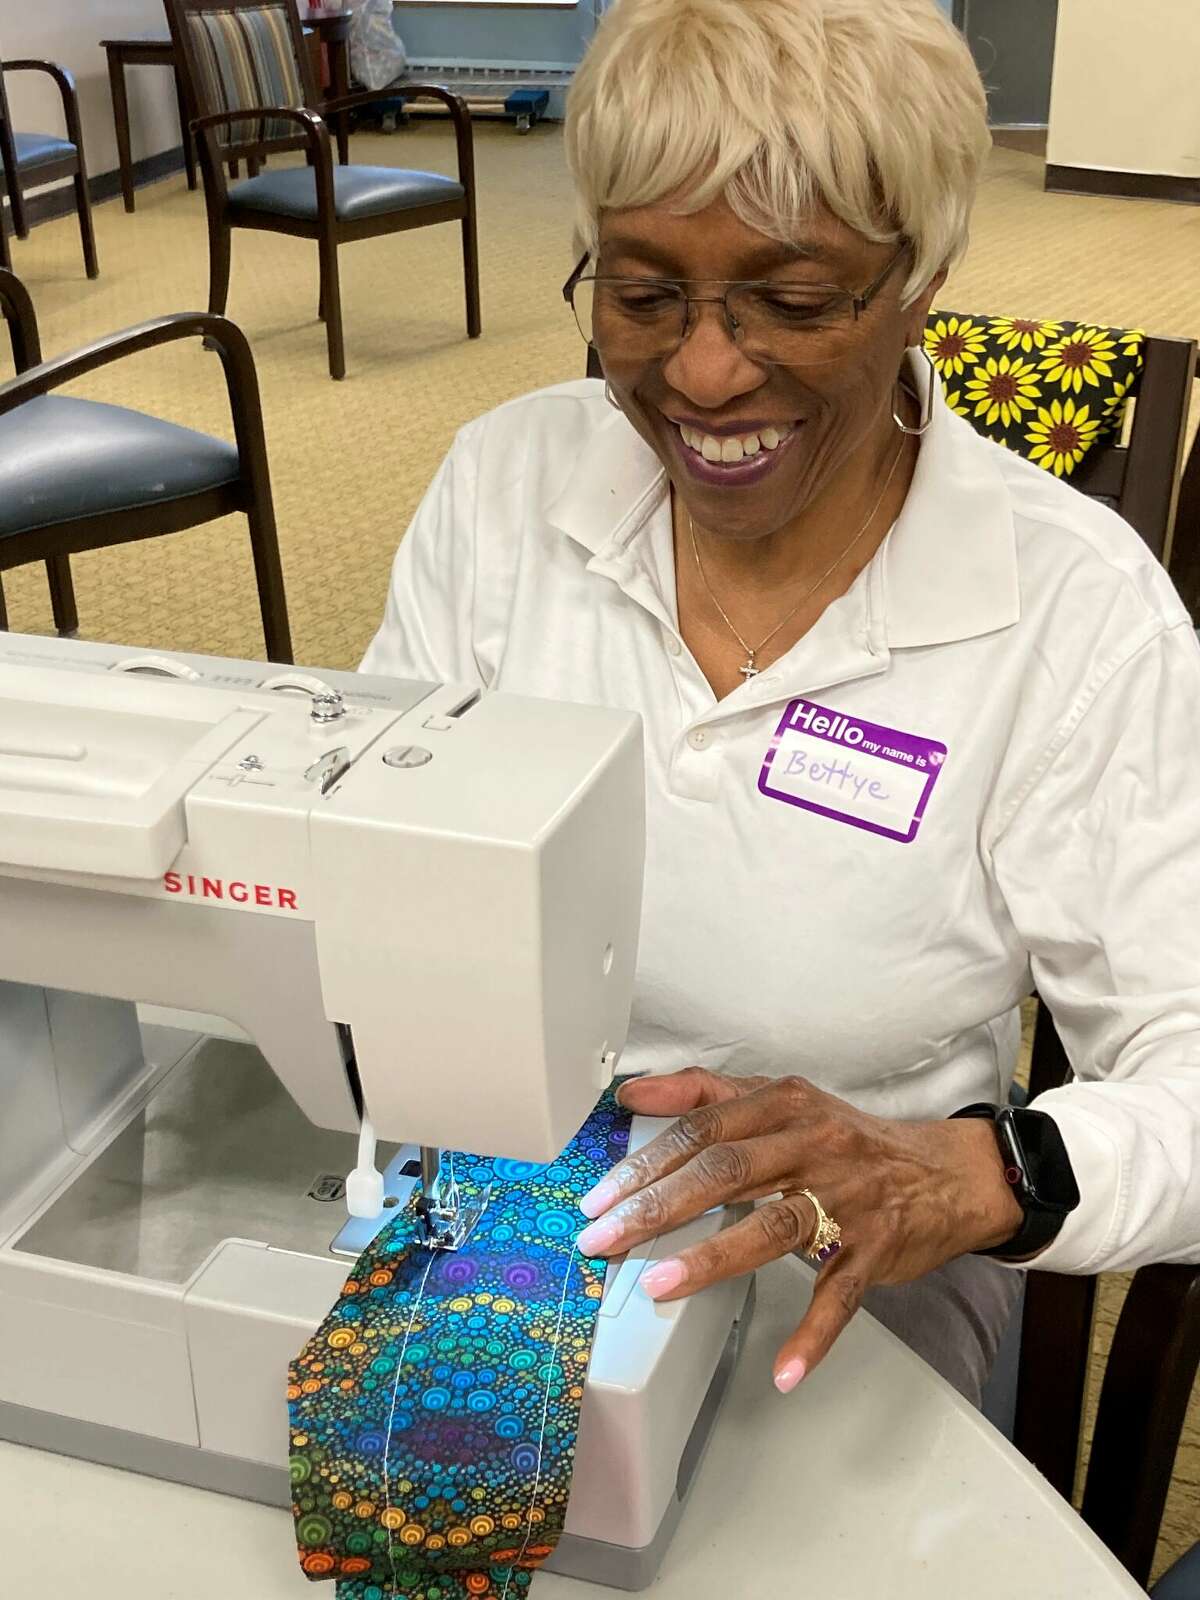 Bettye, a resident at The Towers, sews some fabric together to create a piece of clothing as part of one of the many programs offered through the Proactive Partner Model.